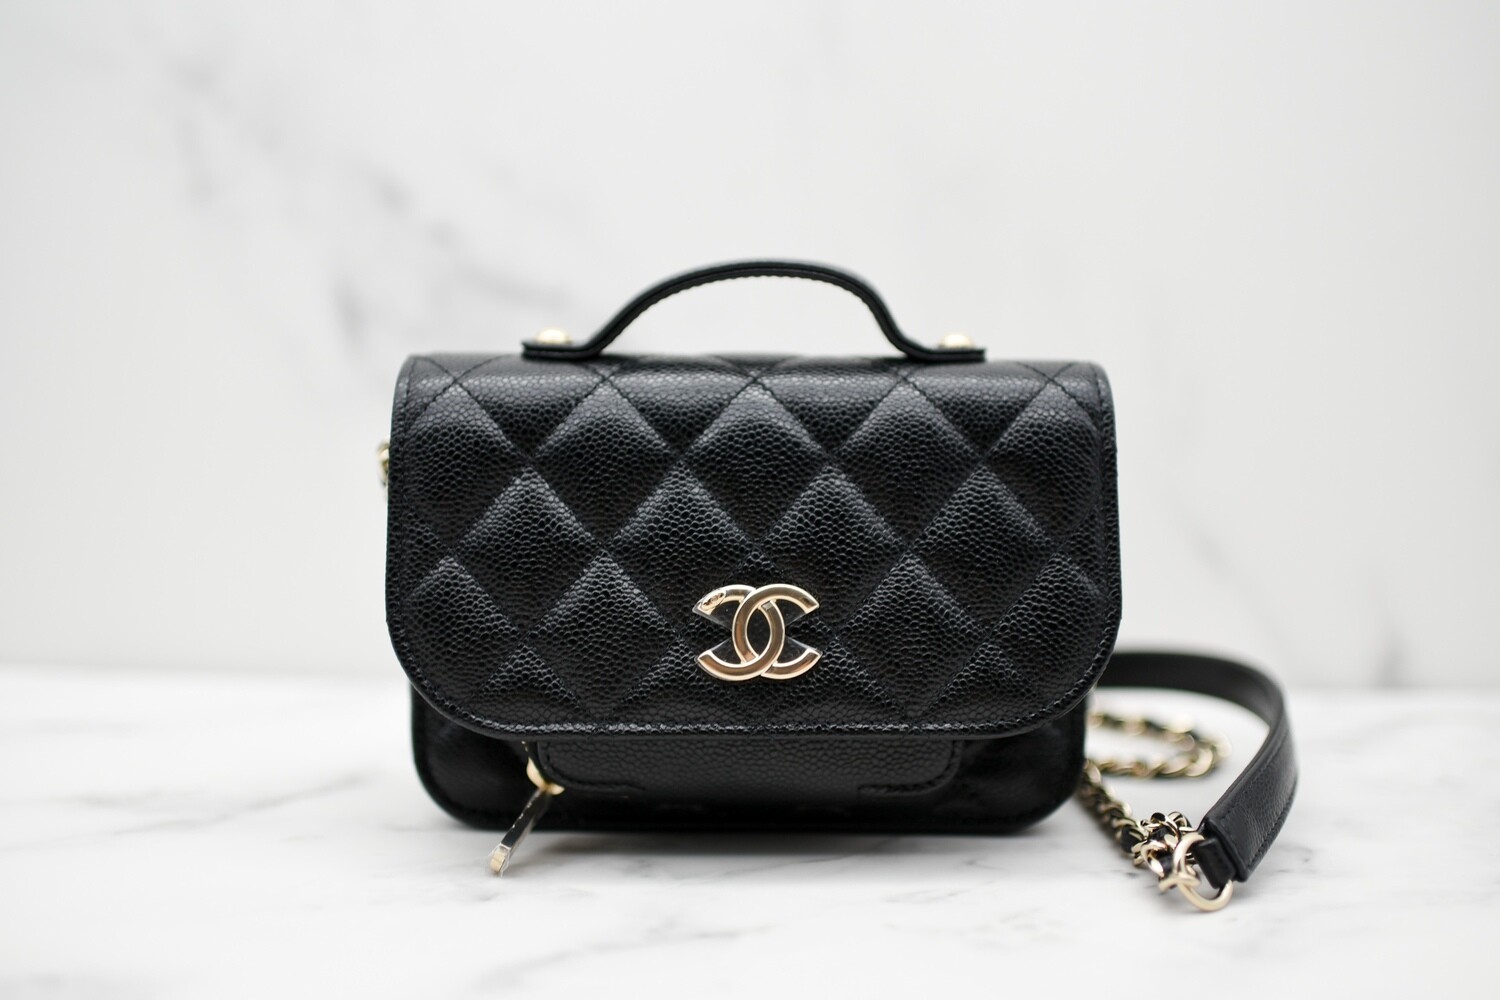 Chanel Business Affinity Purse Vanity Bag, Black Caviar Leather with Gold Hardware, New in Dustbag MA001